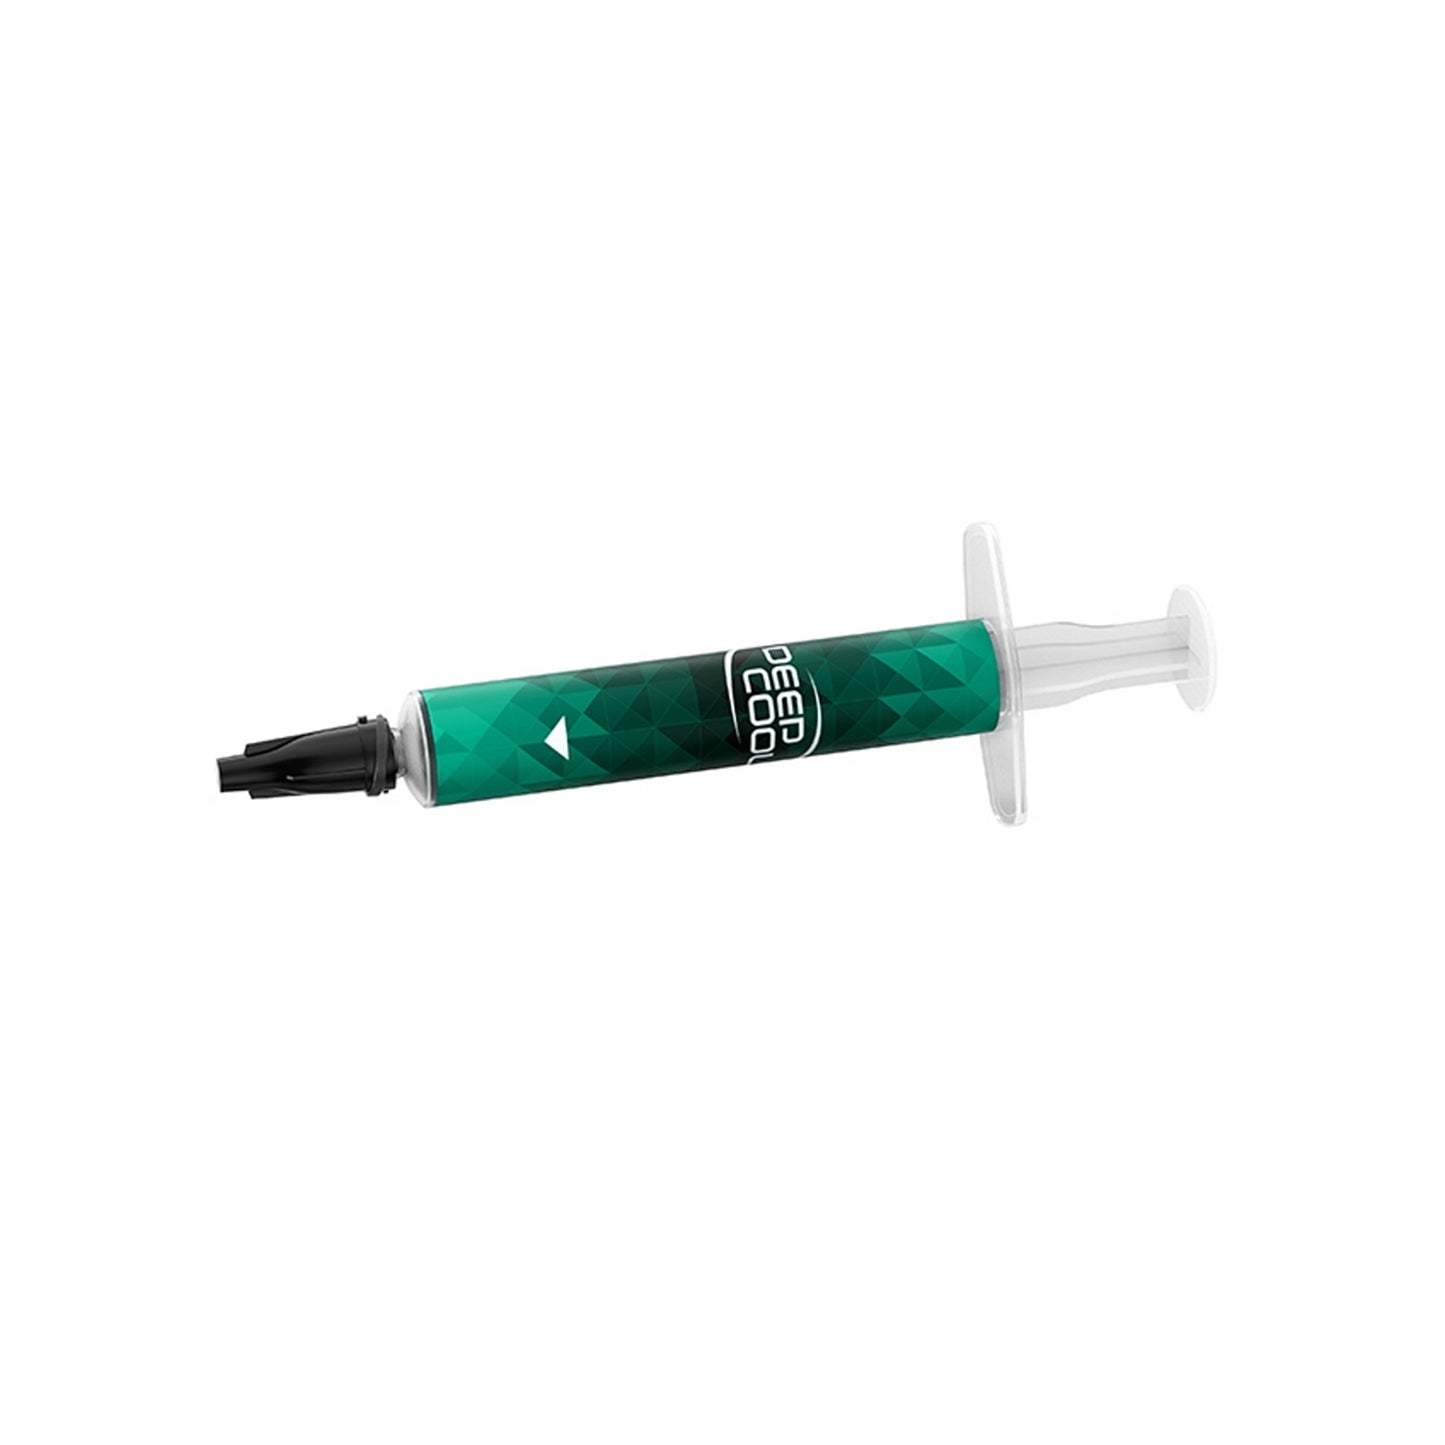 DeepCool Z10 5g Thermal Compound Syringe, Cobalt Blue, Industrial Grade Thermal Interface, High Thermal Conductivity